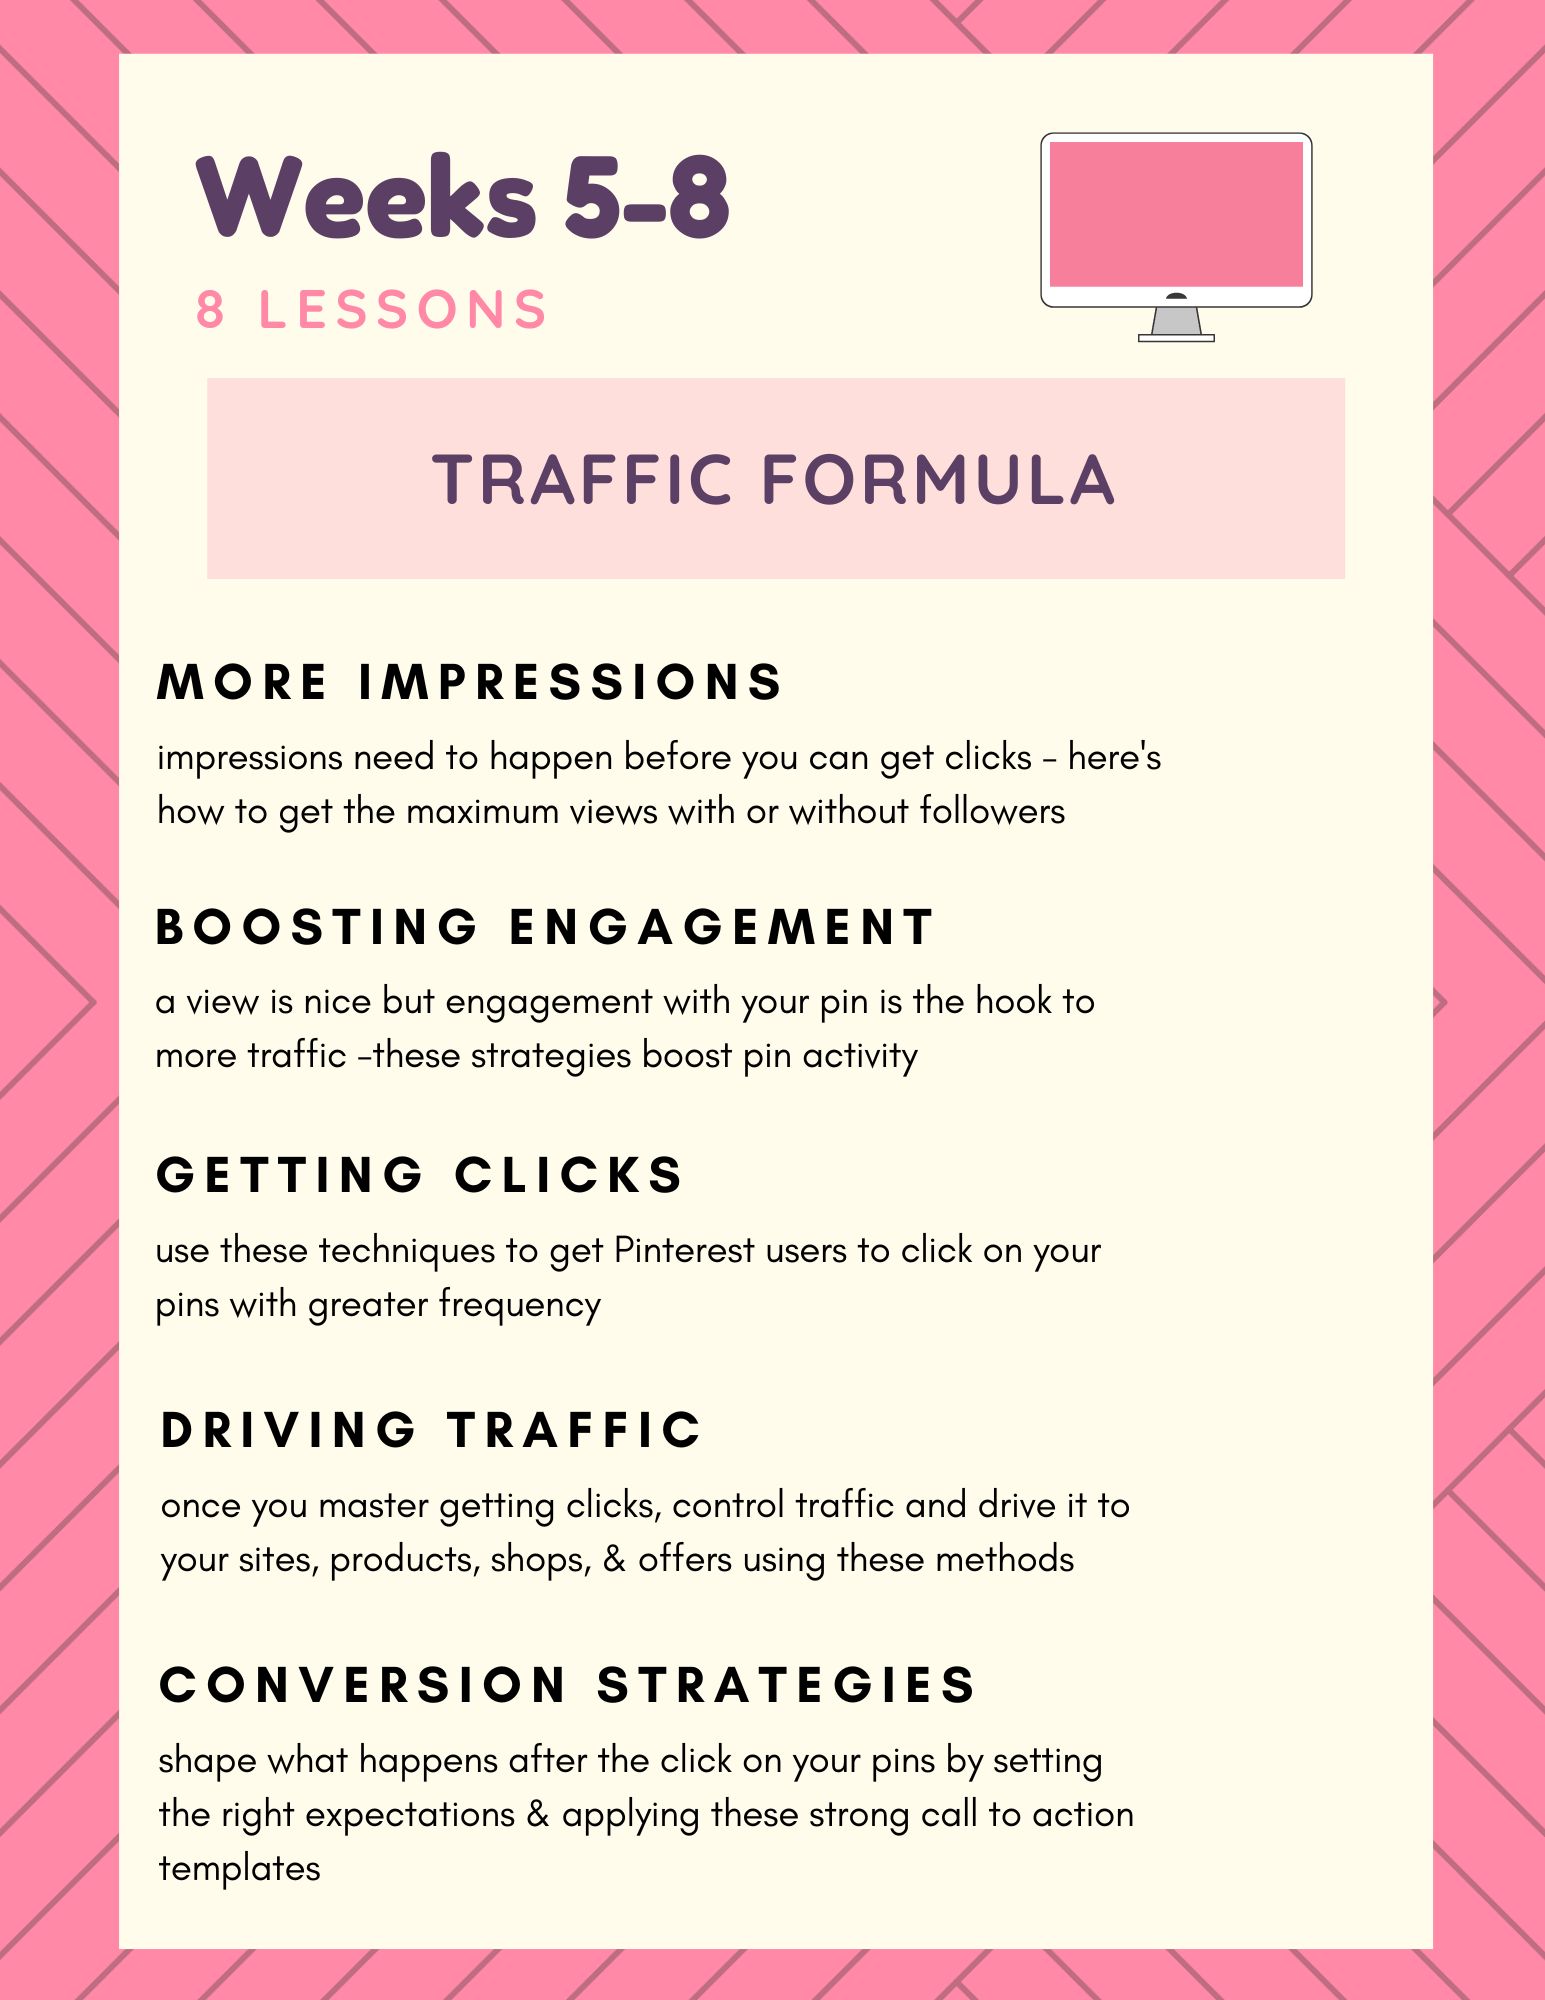 overview of weeks 5 to 8 course topics - traffic formula